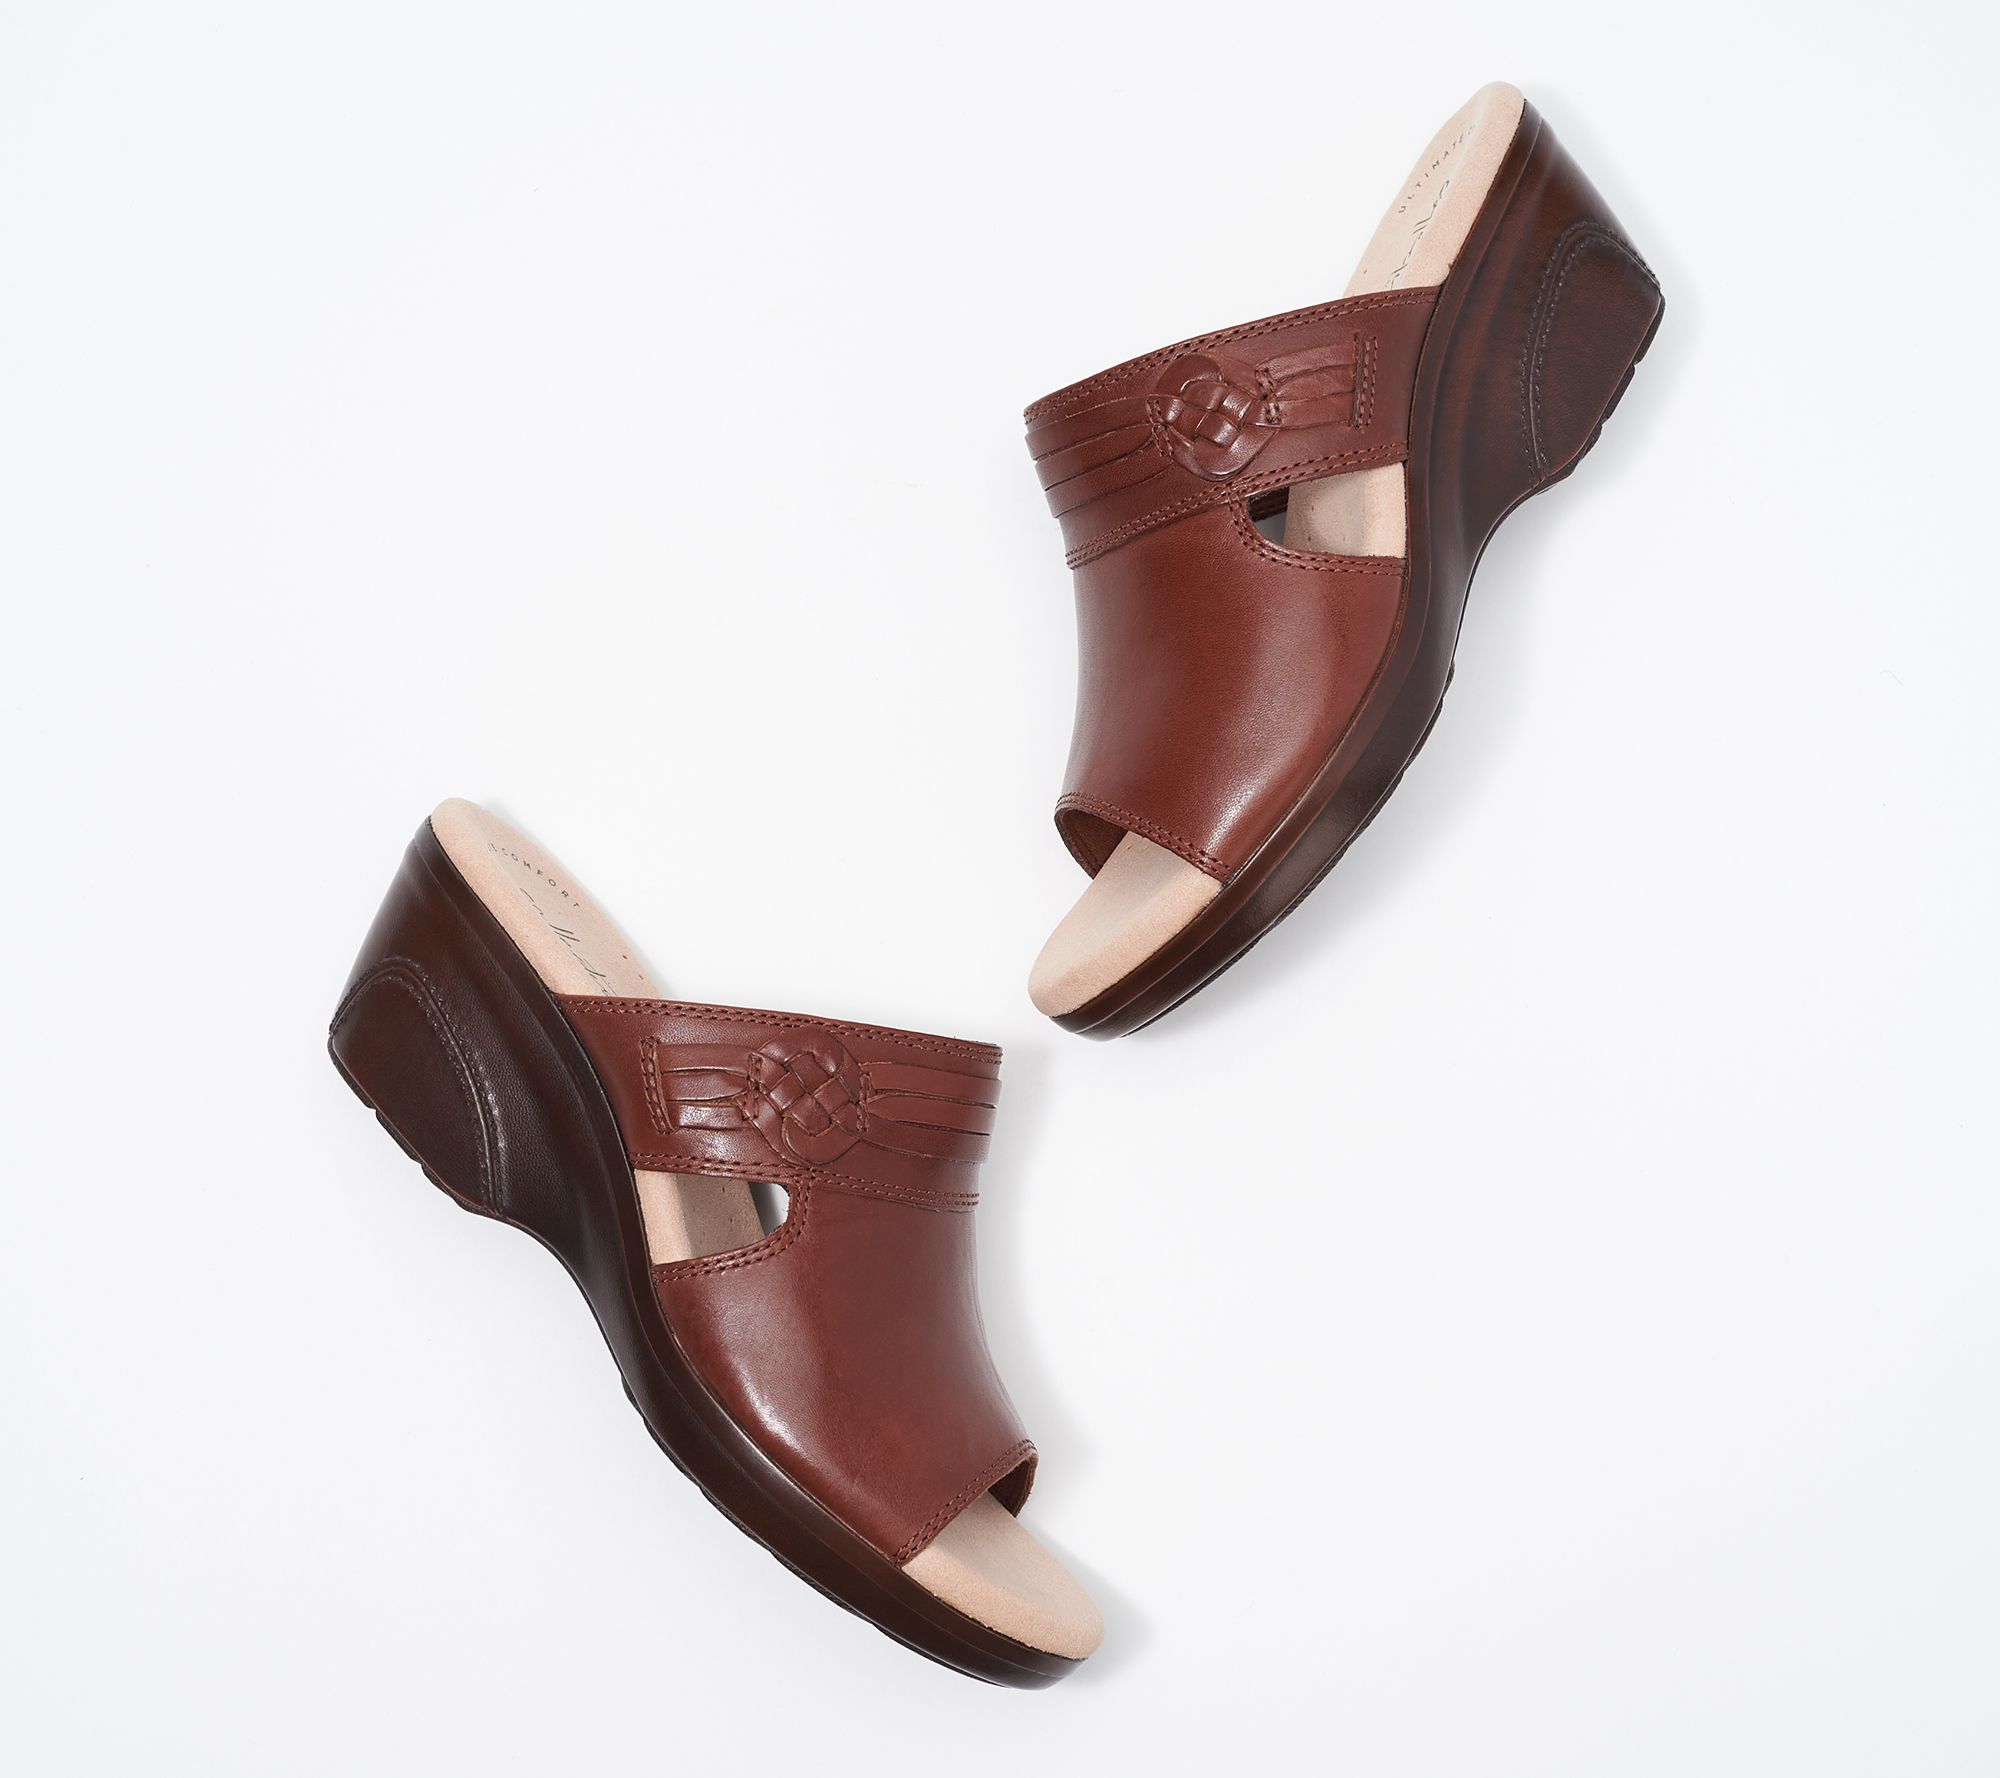 Clarks Collection Leather Wedge Slide Sandals - Lynette Trudie QVC.com